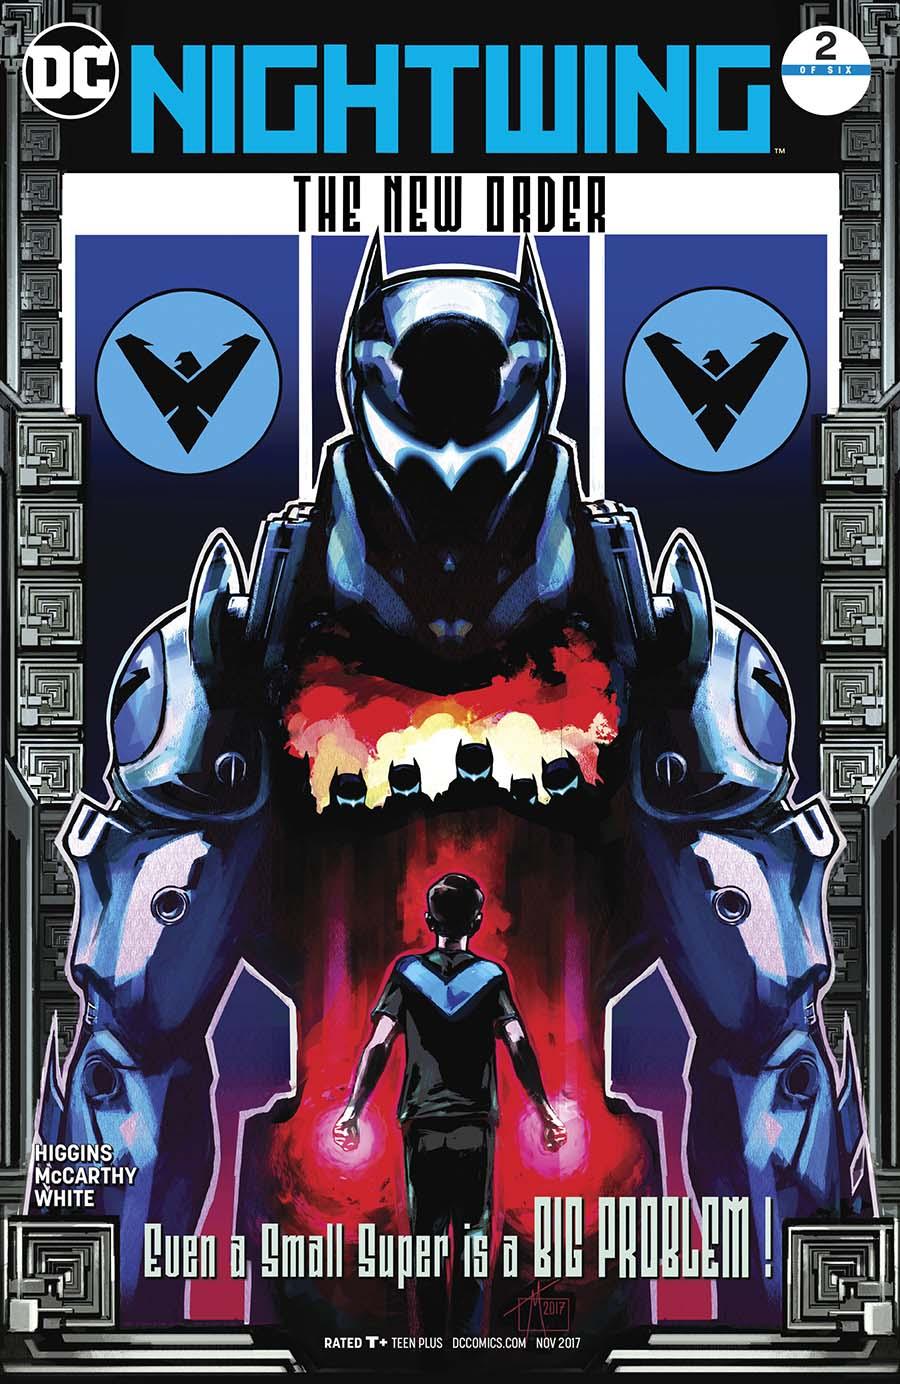 Nightwing The New Order Vol. 1 #2